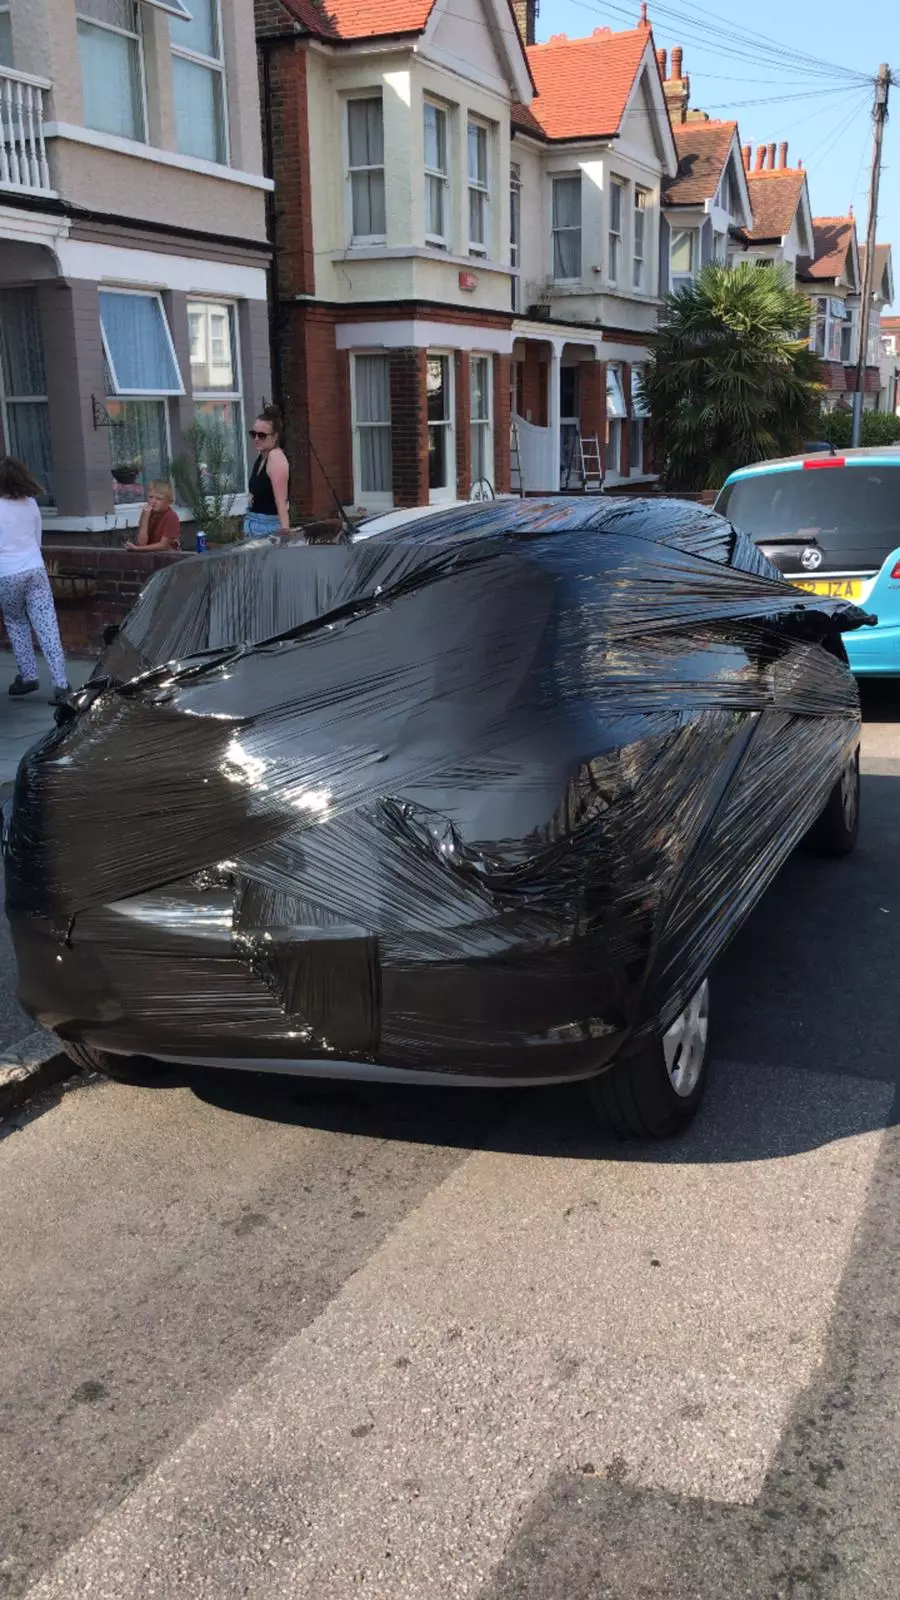 Tobe Bailey wrapped the offending car in cellophane after it blocked his driveway for a day and a half (